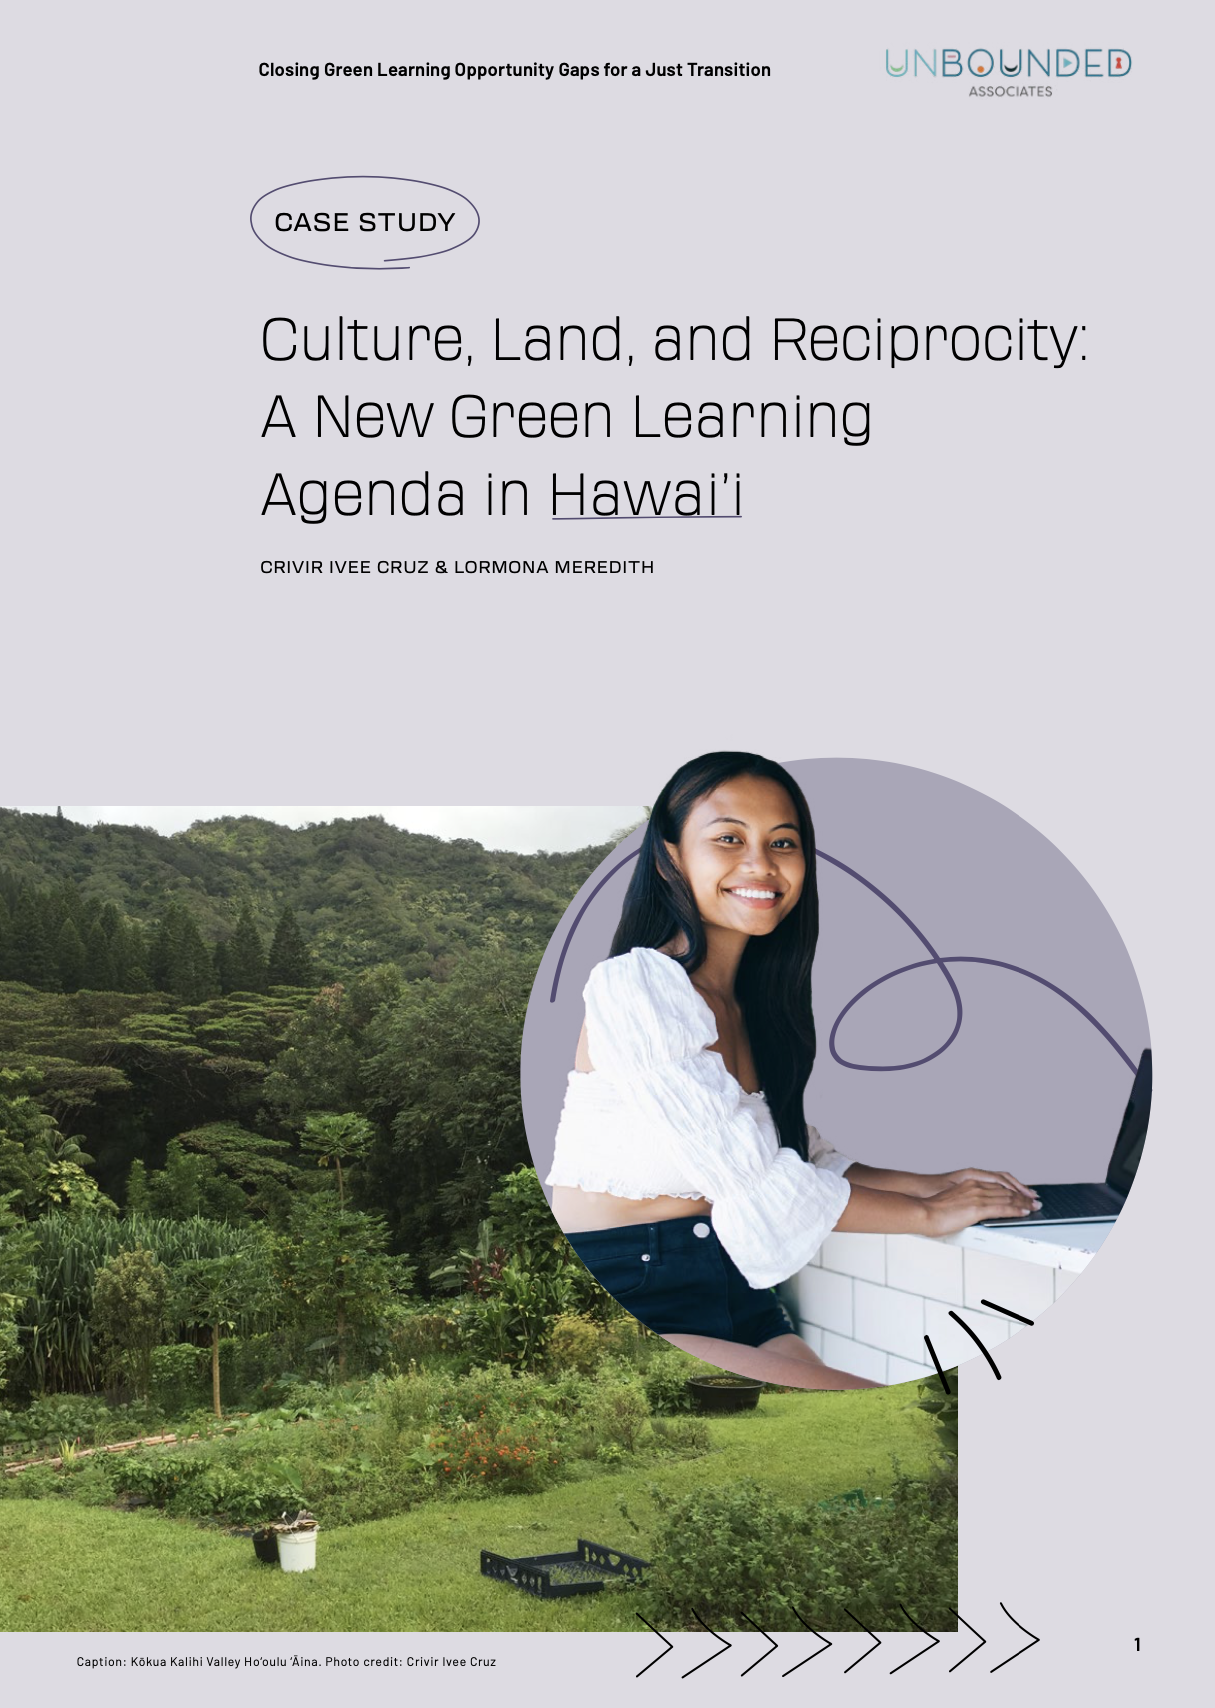 Culture, Land, and Reciprocity: A New Green Learning Agenda in Hawai'i